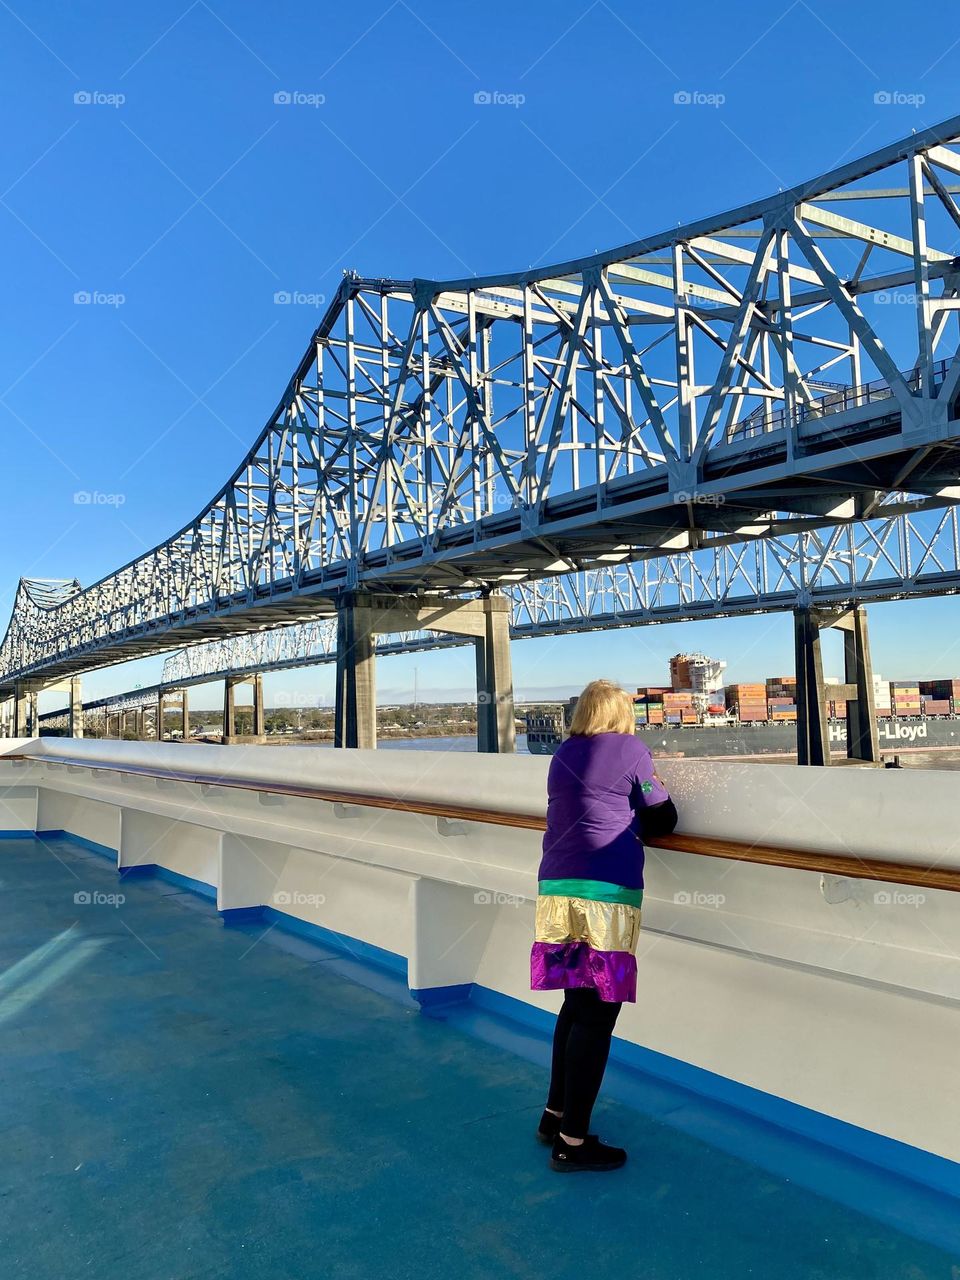 A lady wearing Mardi Gras colors standing at the railing on a cruise ship looking at the view of a bridge